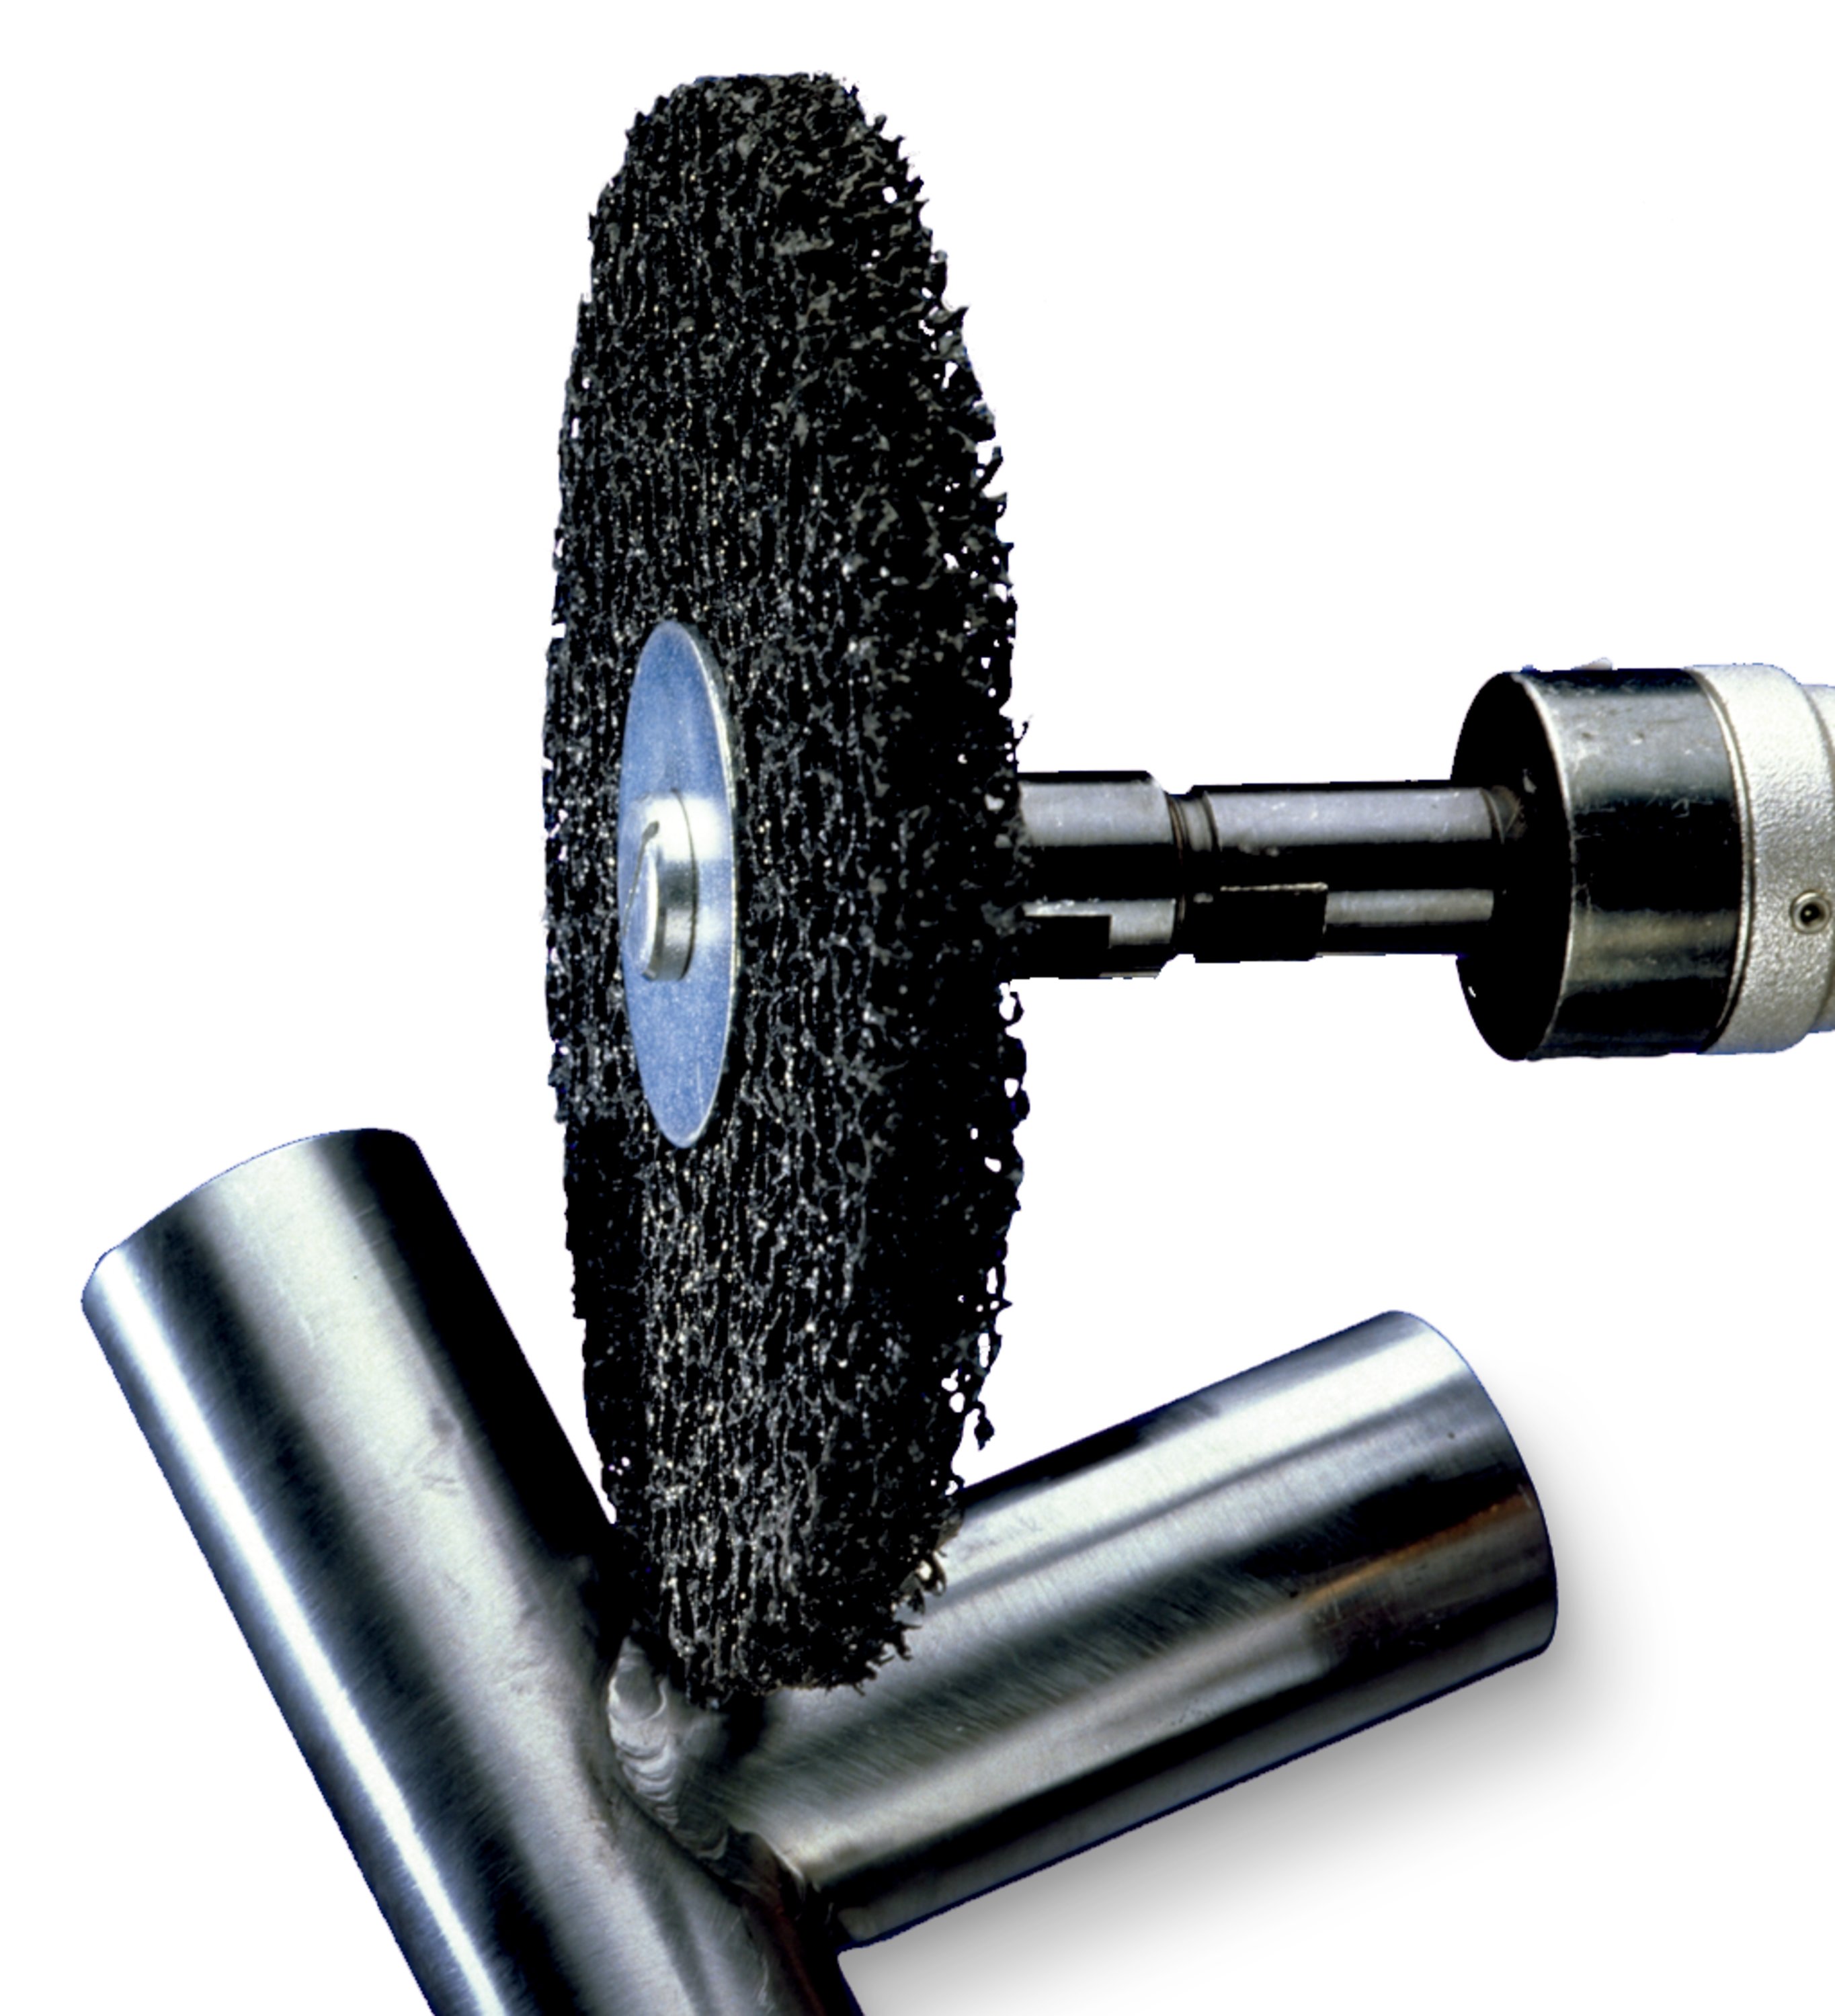 Scotch-Brite™ Clean and Strip Disc has all the benefits operators have come to expect from Scotch-Brite™ abrasives, including good load resistance and consistent cutting action.